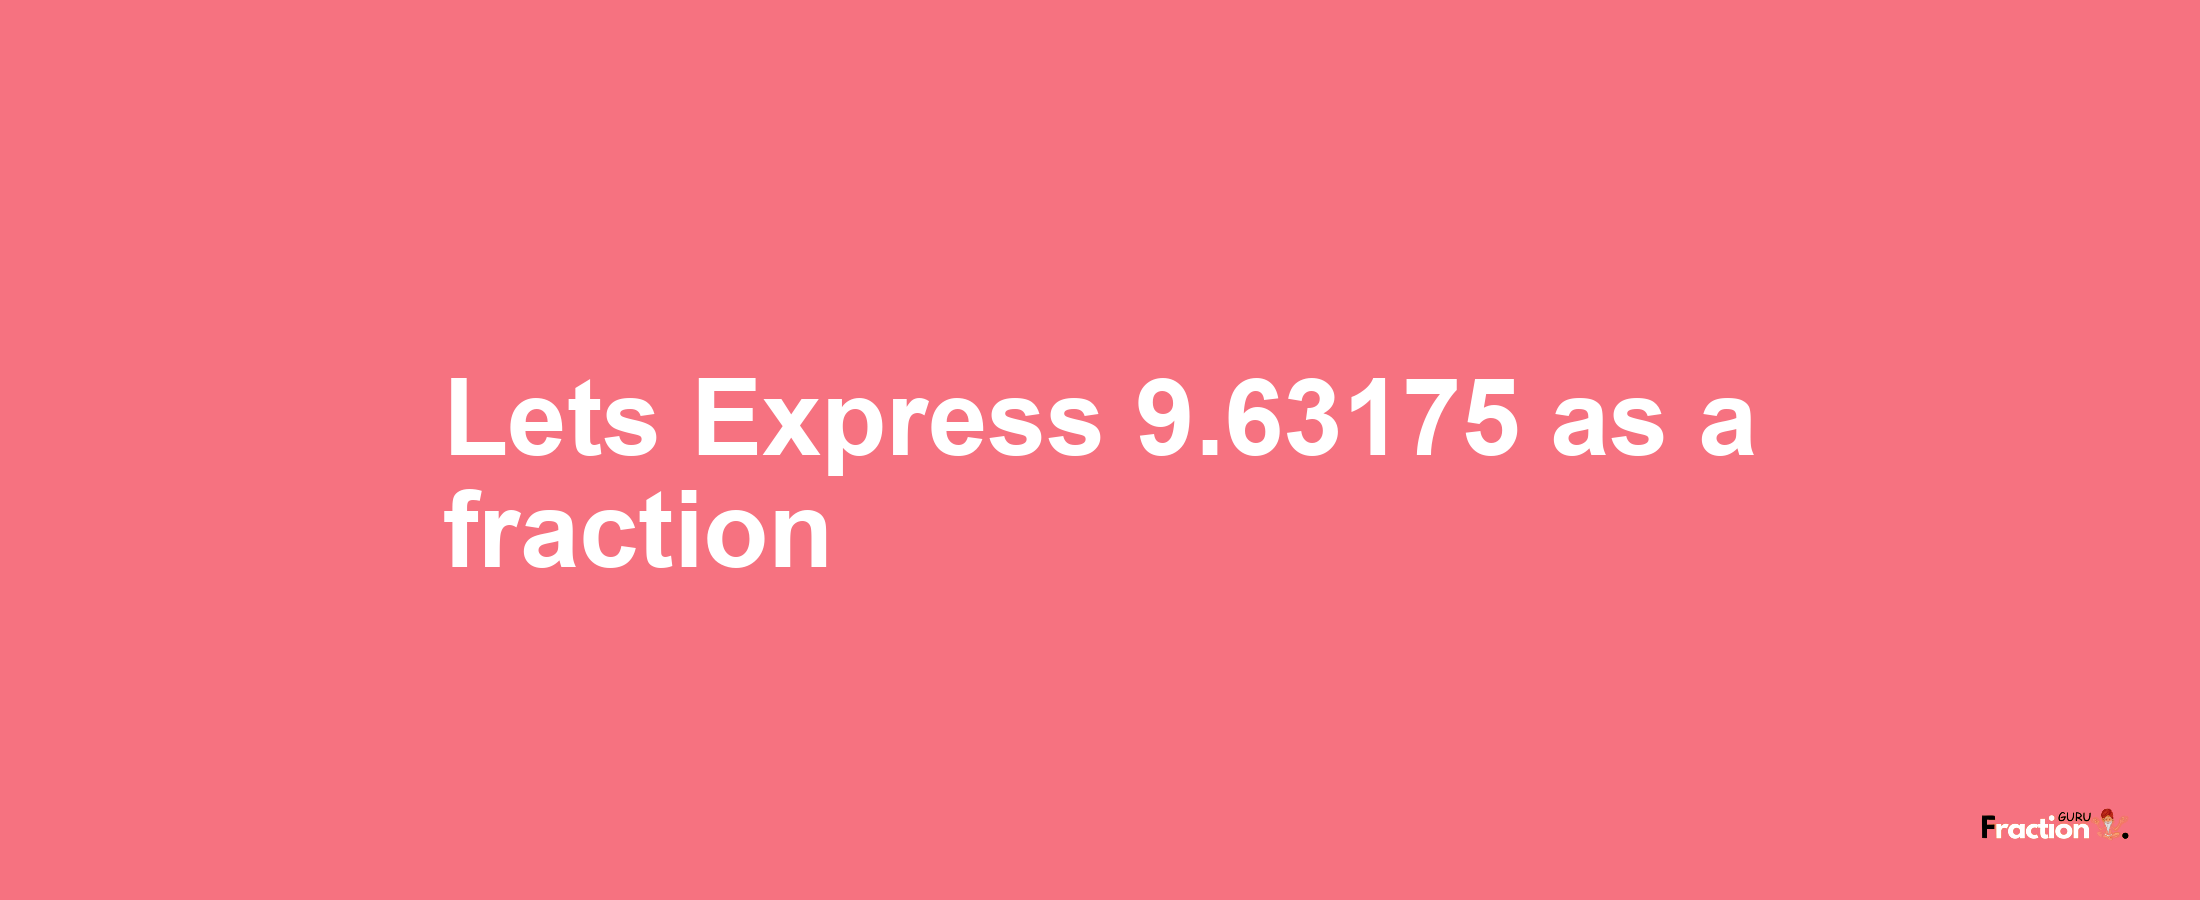 Lets Express 9.63175 as afraction